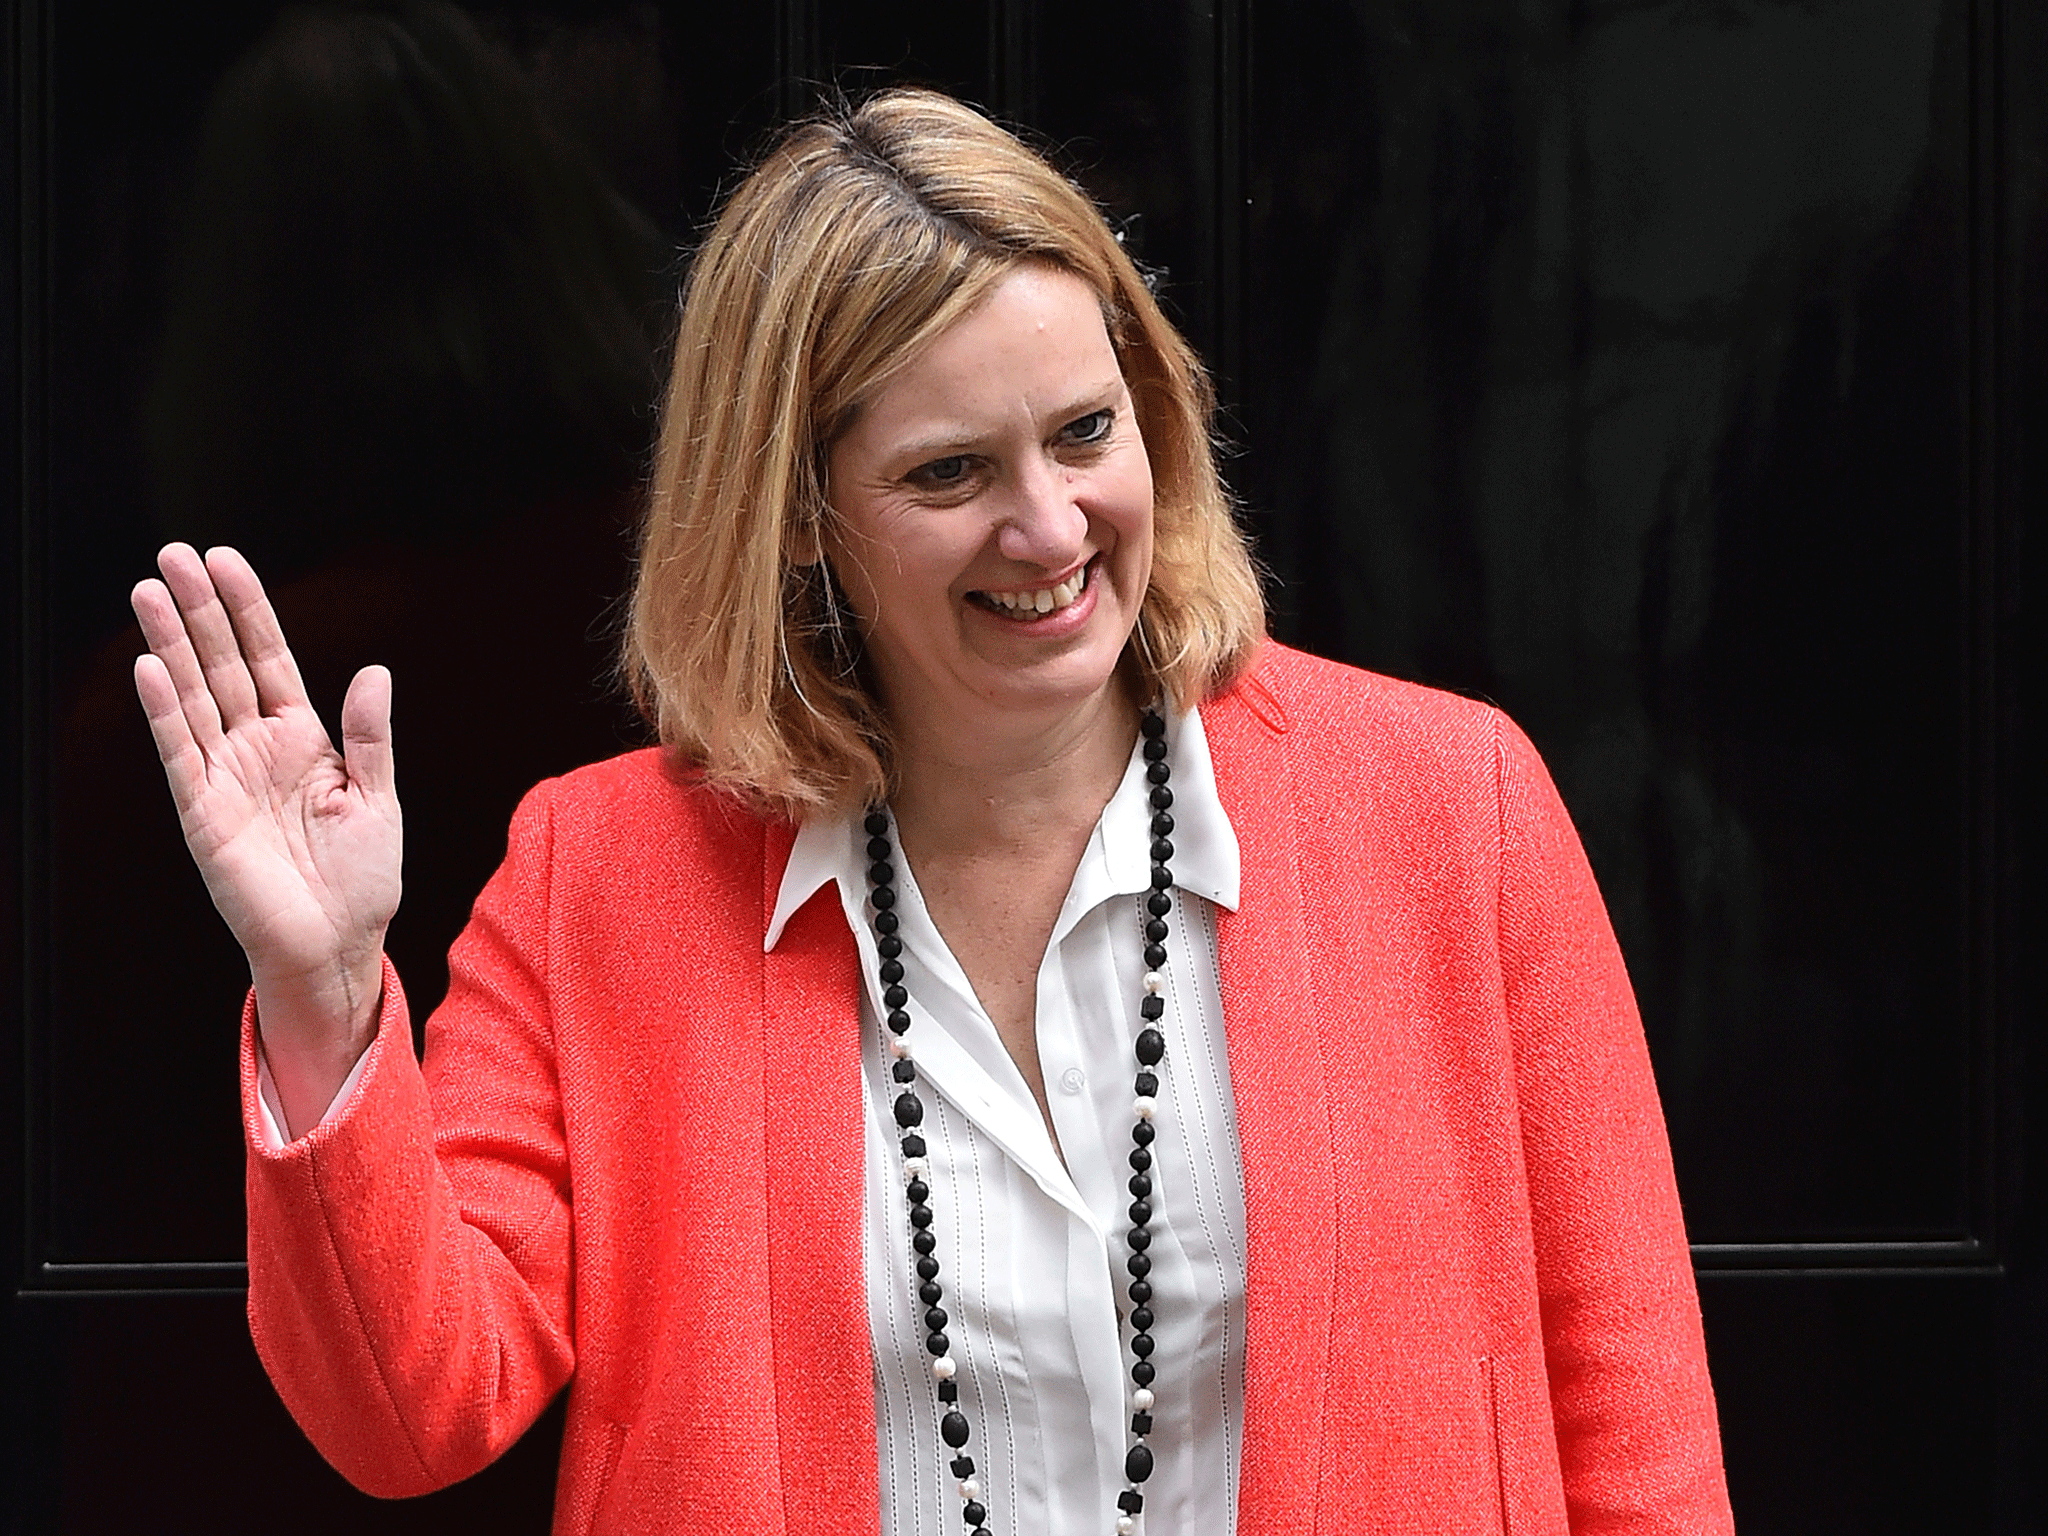 Energy Secretary Amber Rudd today announced the plans to close the 'renewables obligation' scheme for onshore wind farms from April 2016